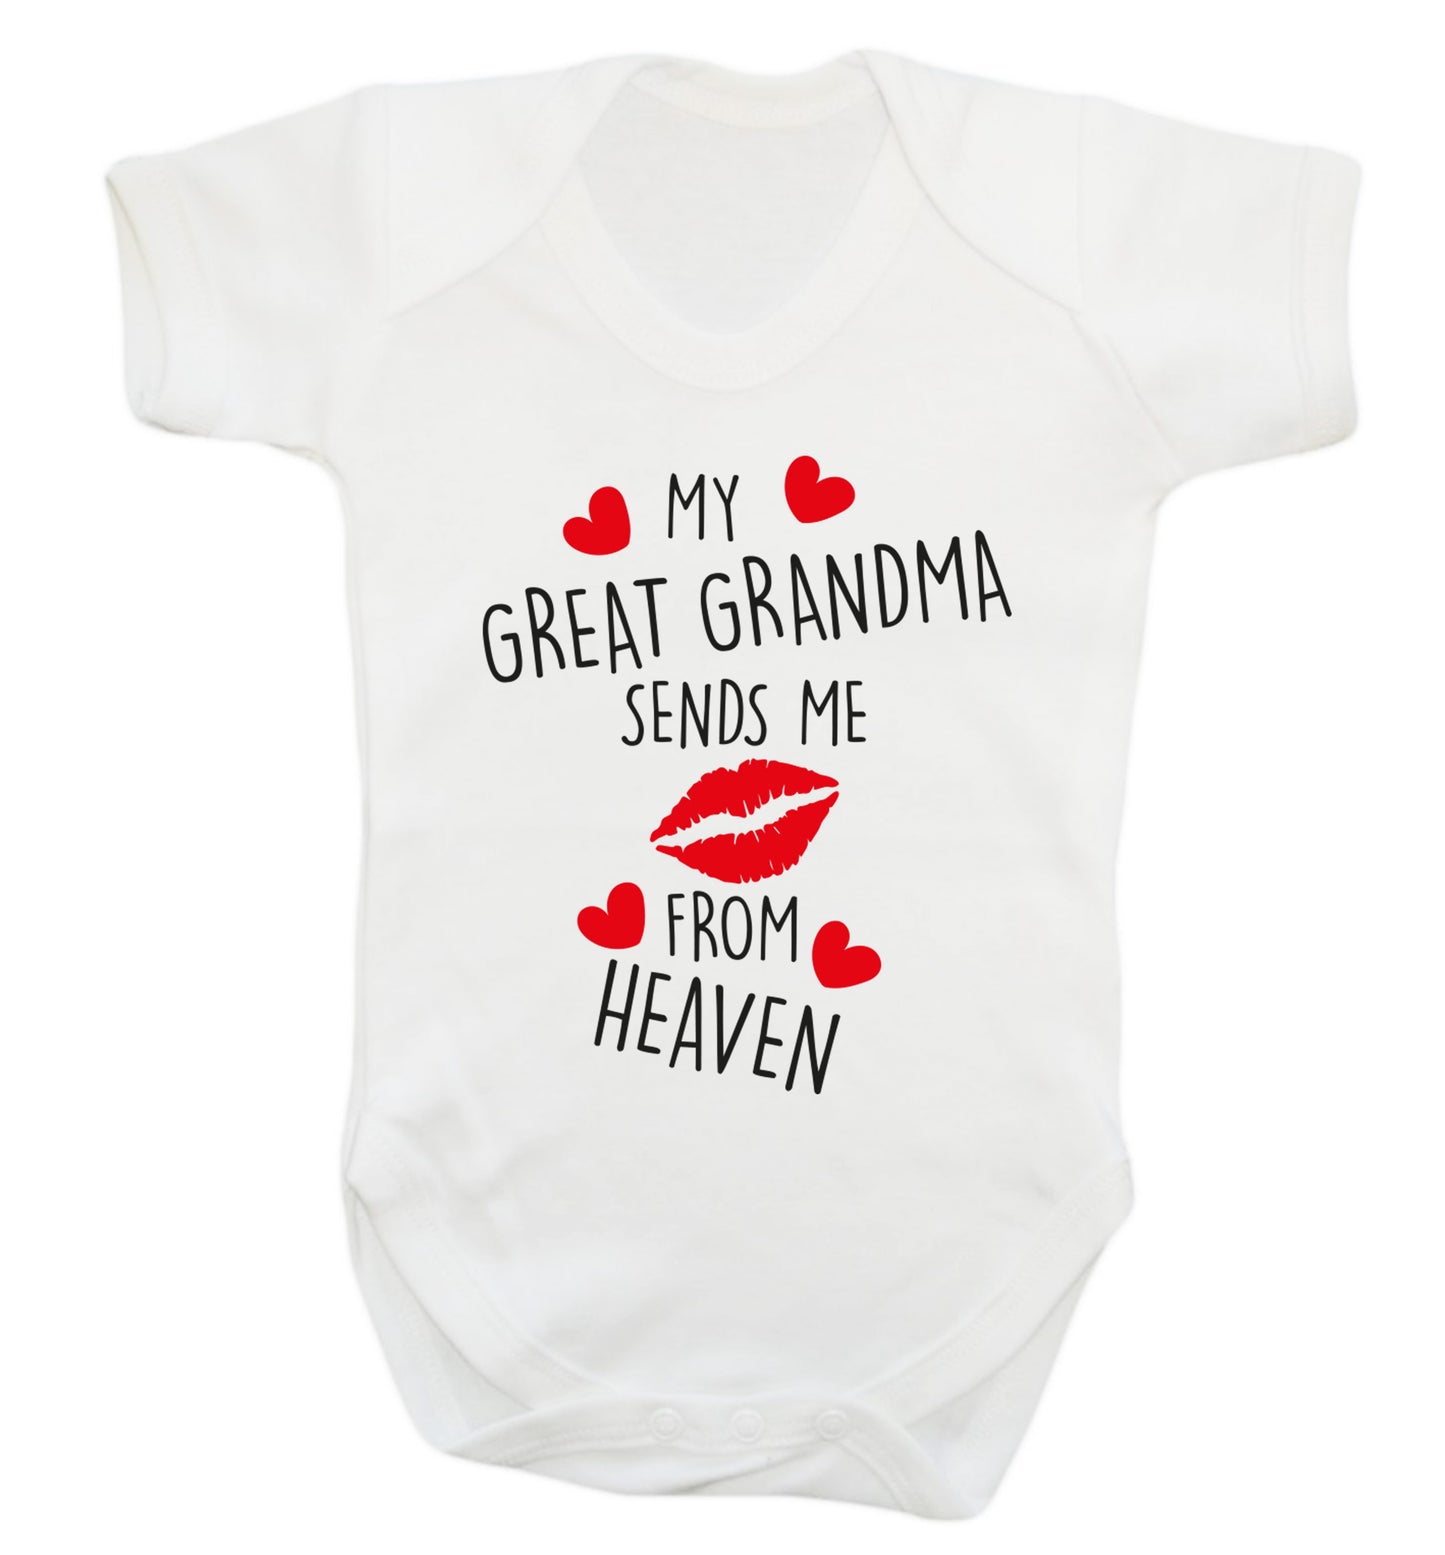 My great grandma sends me kisses from heaven Baby Vest white 18-24 months